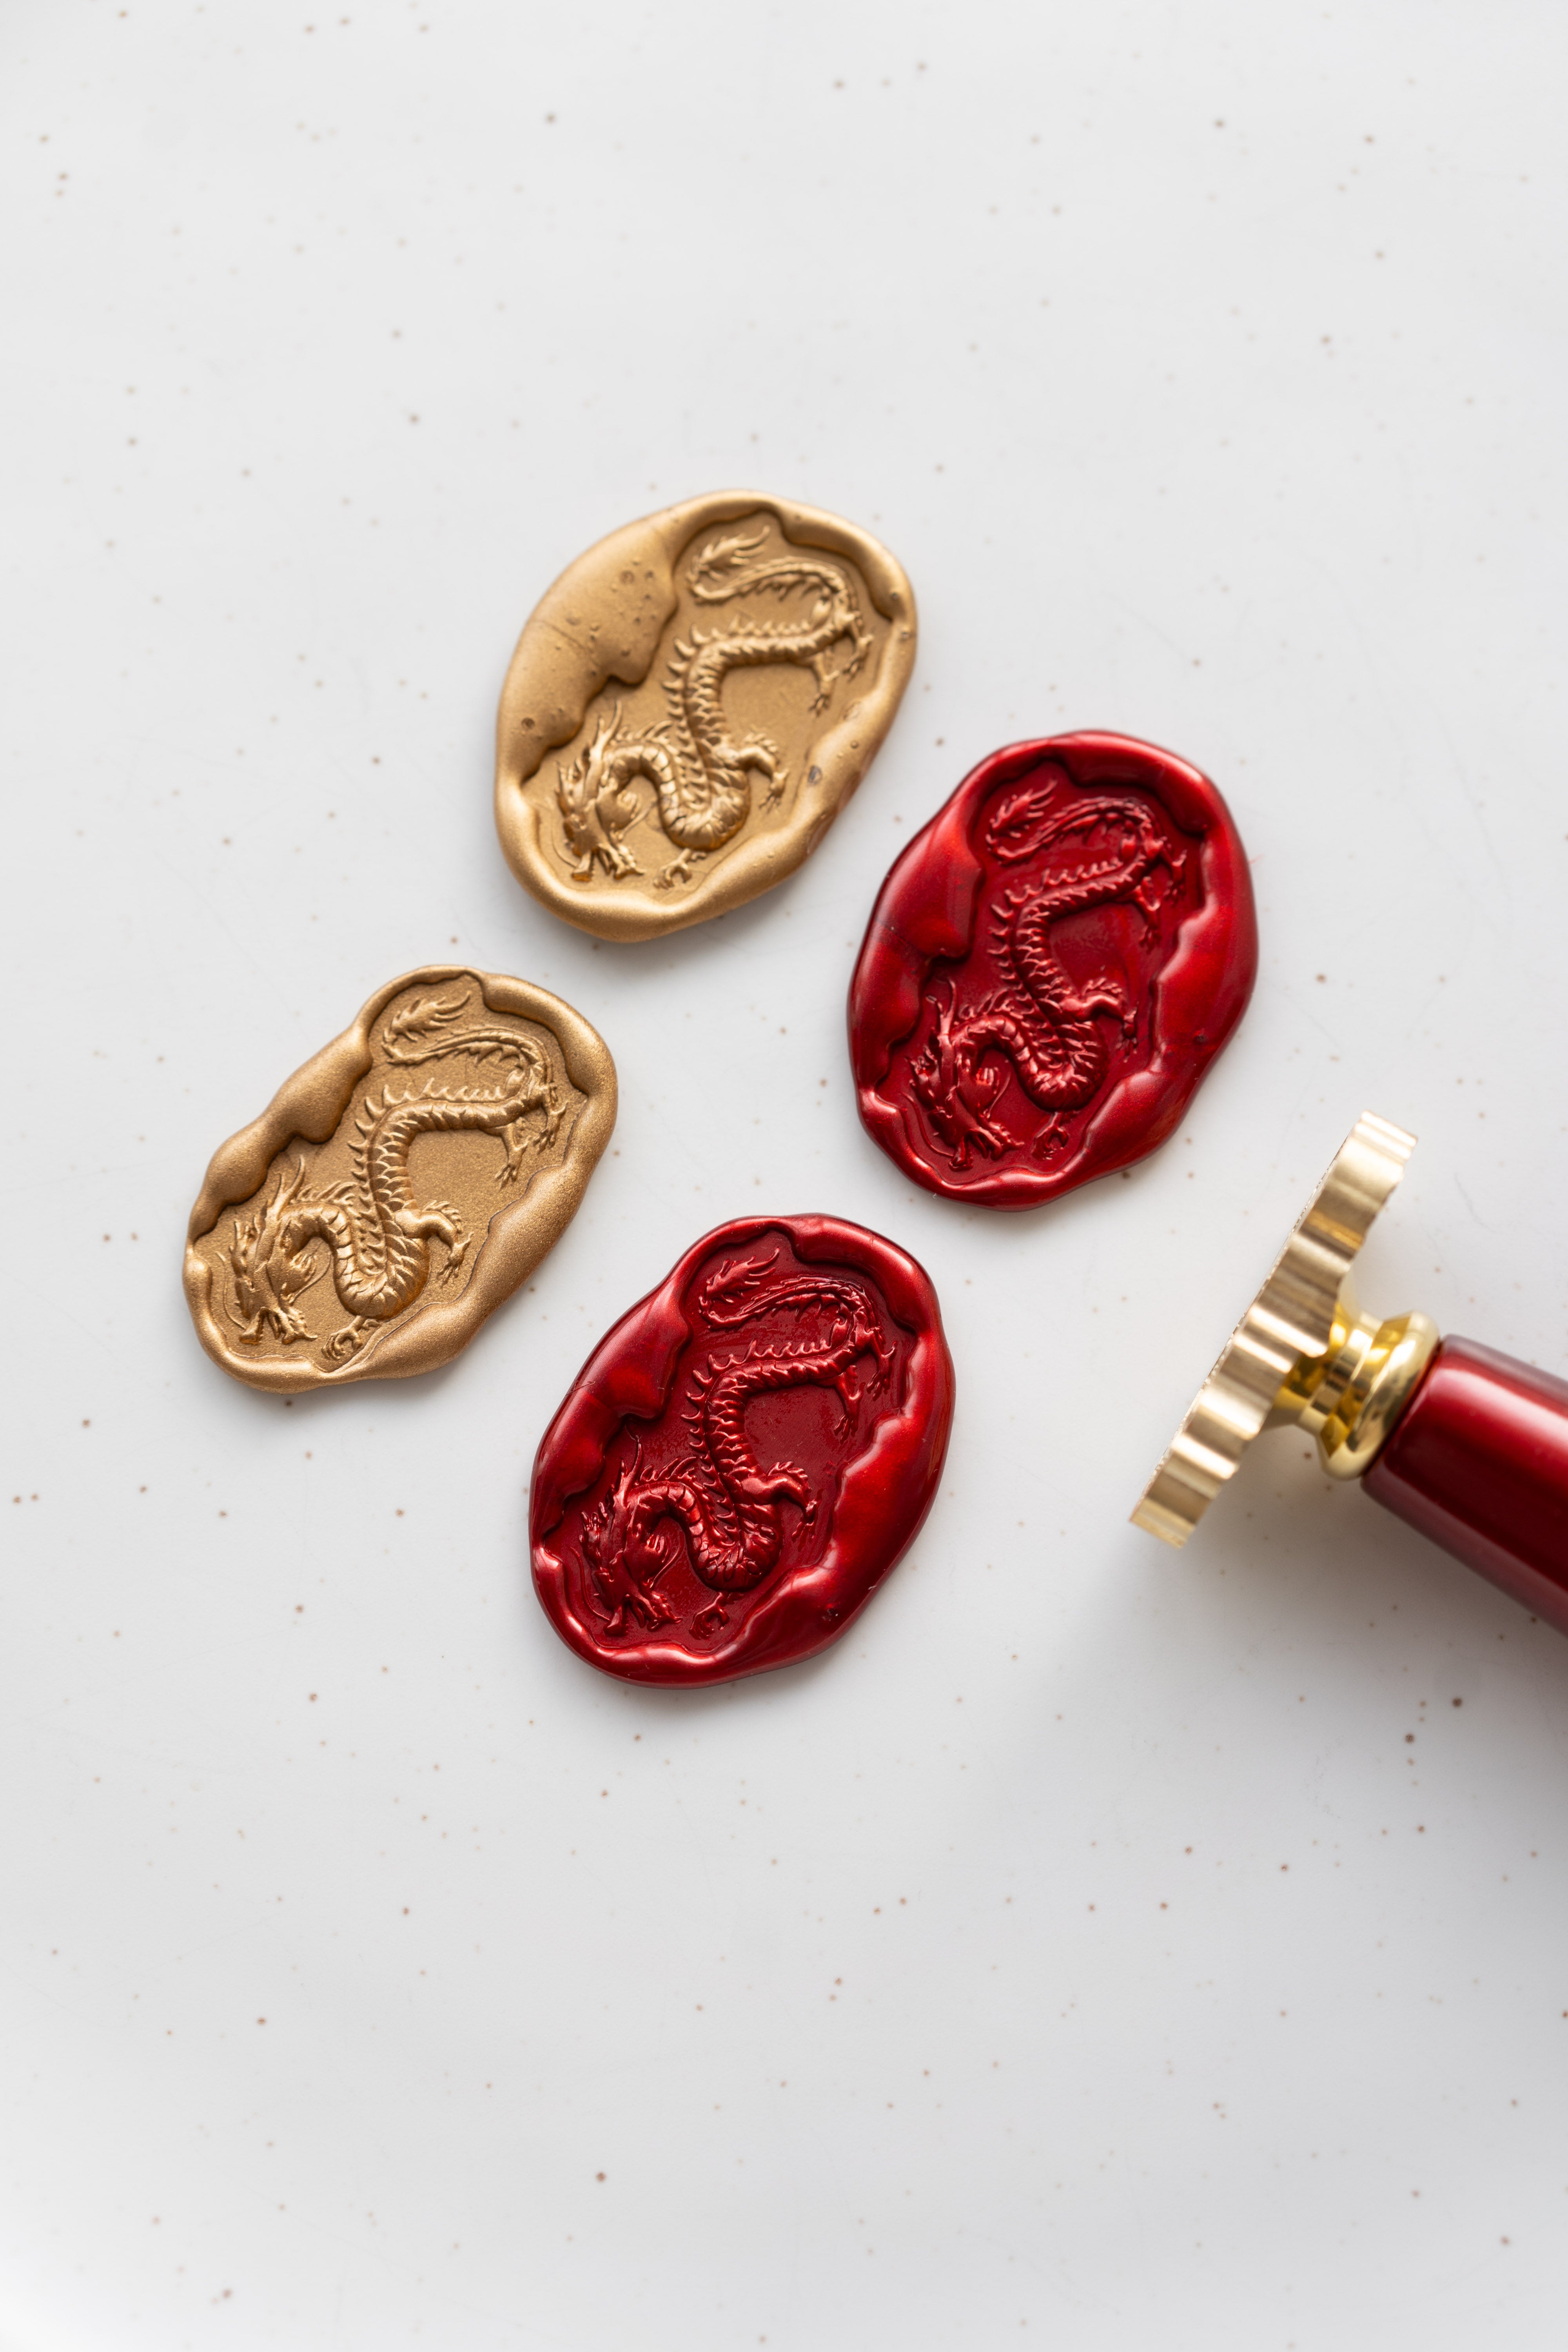 Welsh Dragon Wax Seal Stamp